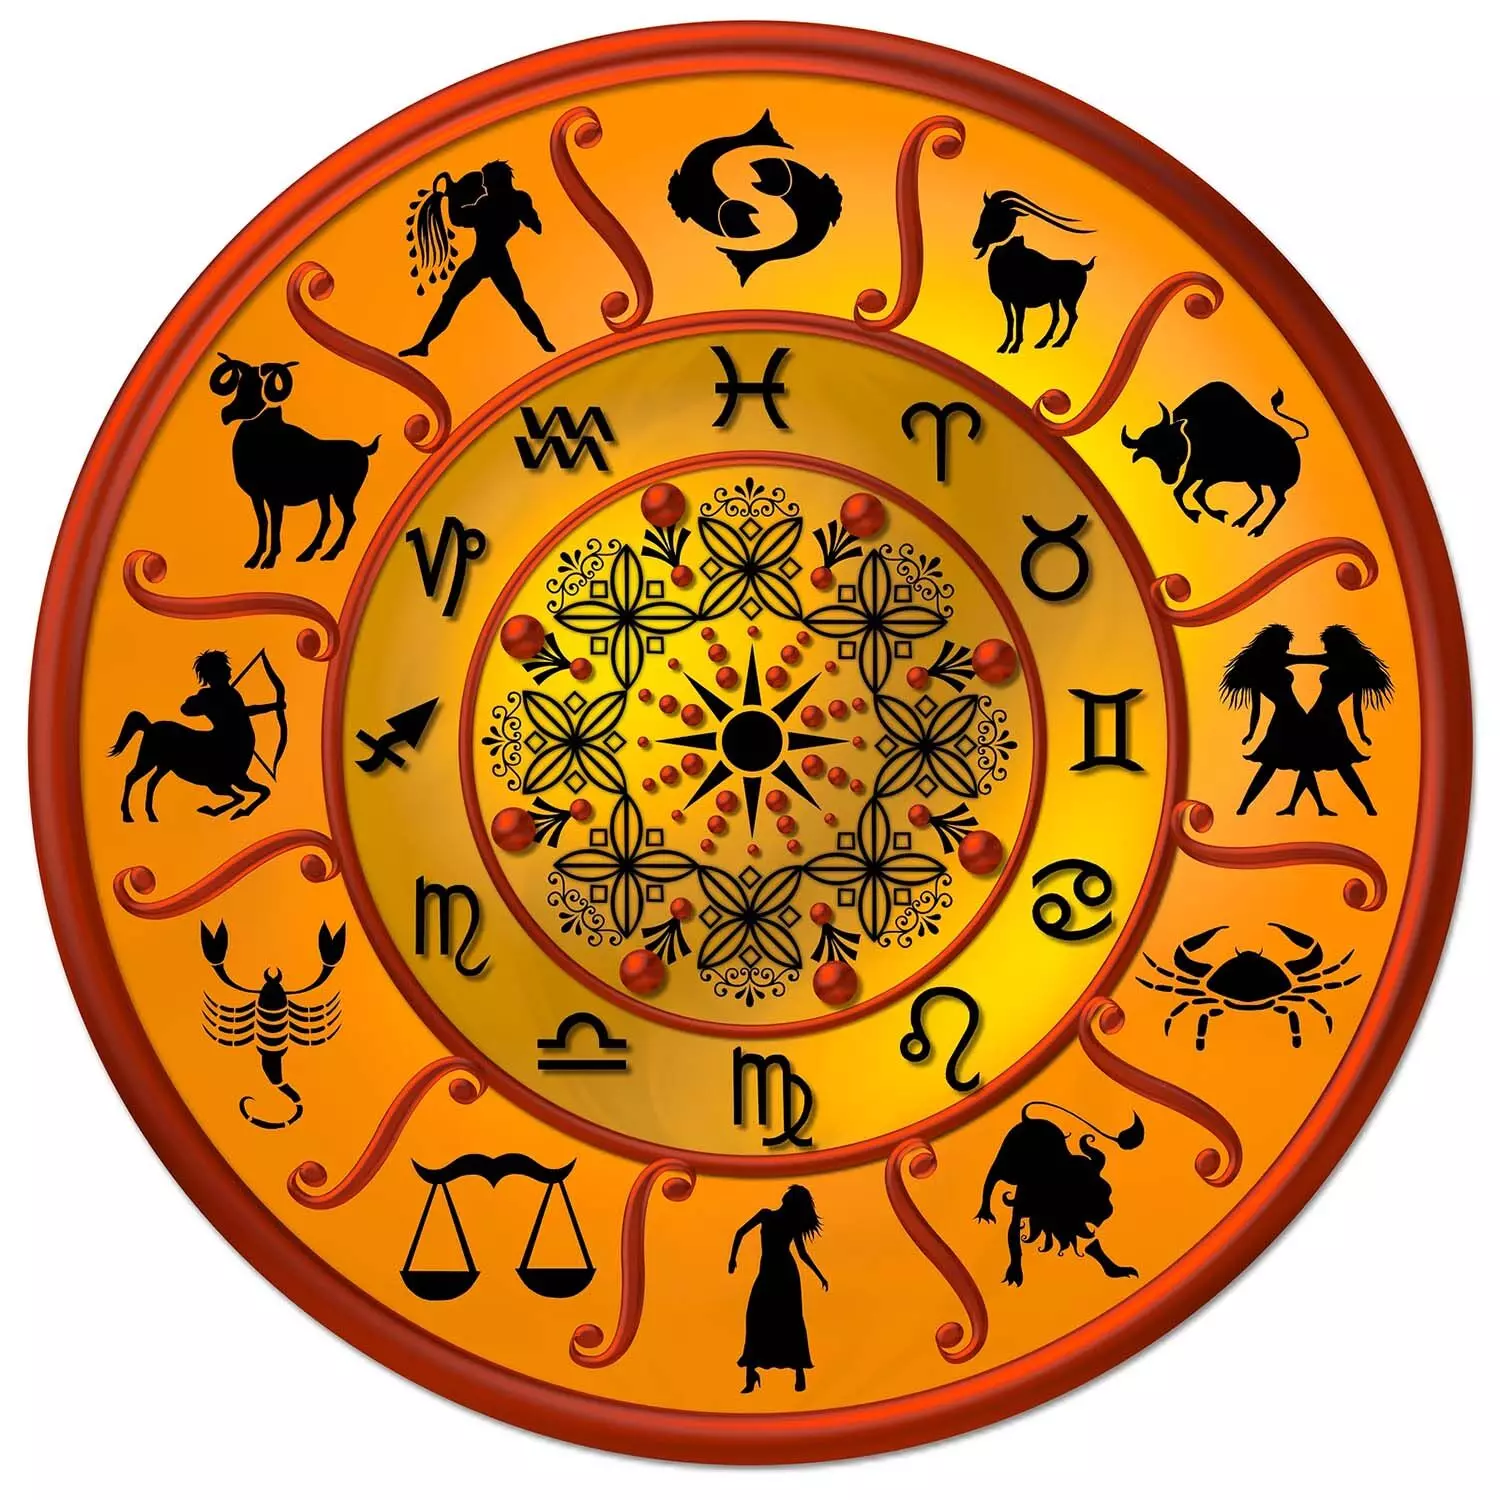 11 June – Know your todays horoscope